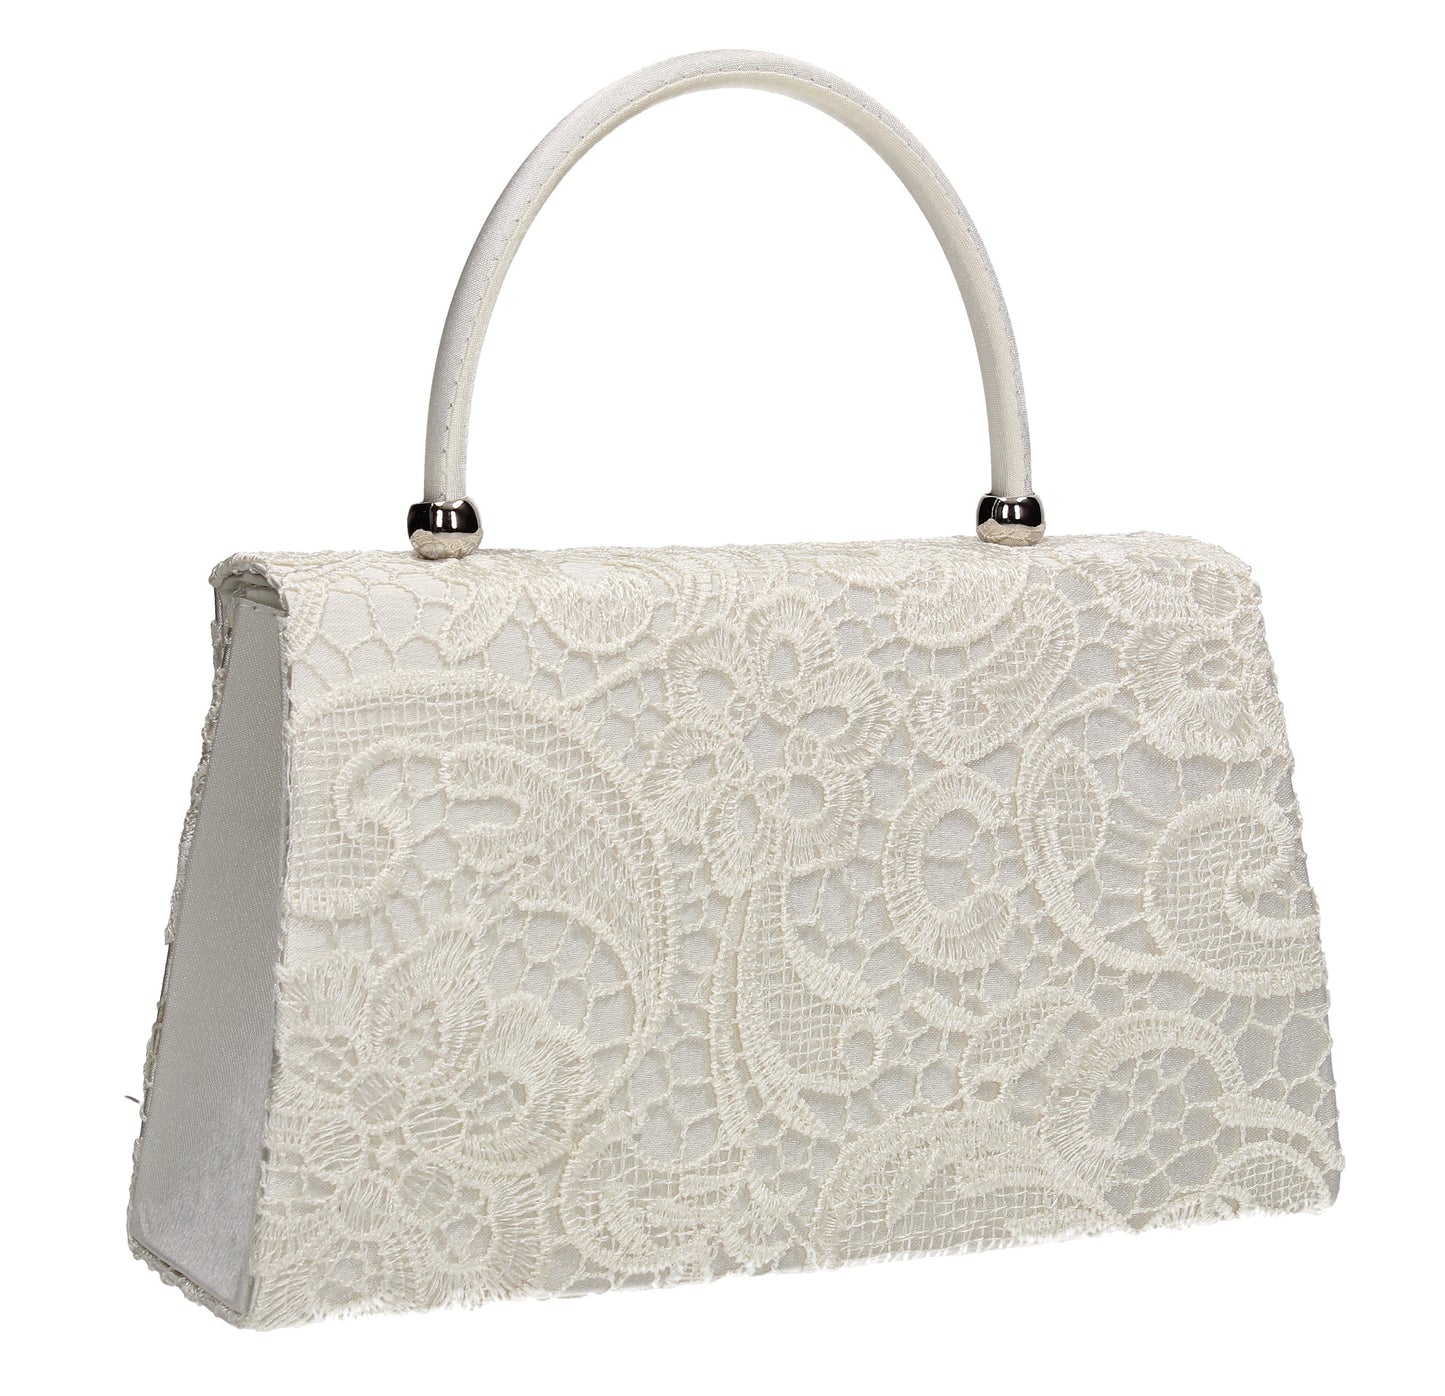 Kendall Lace Clutch Bag Ivory